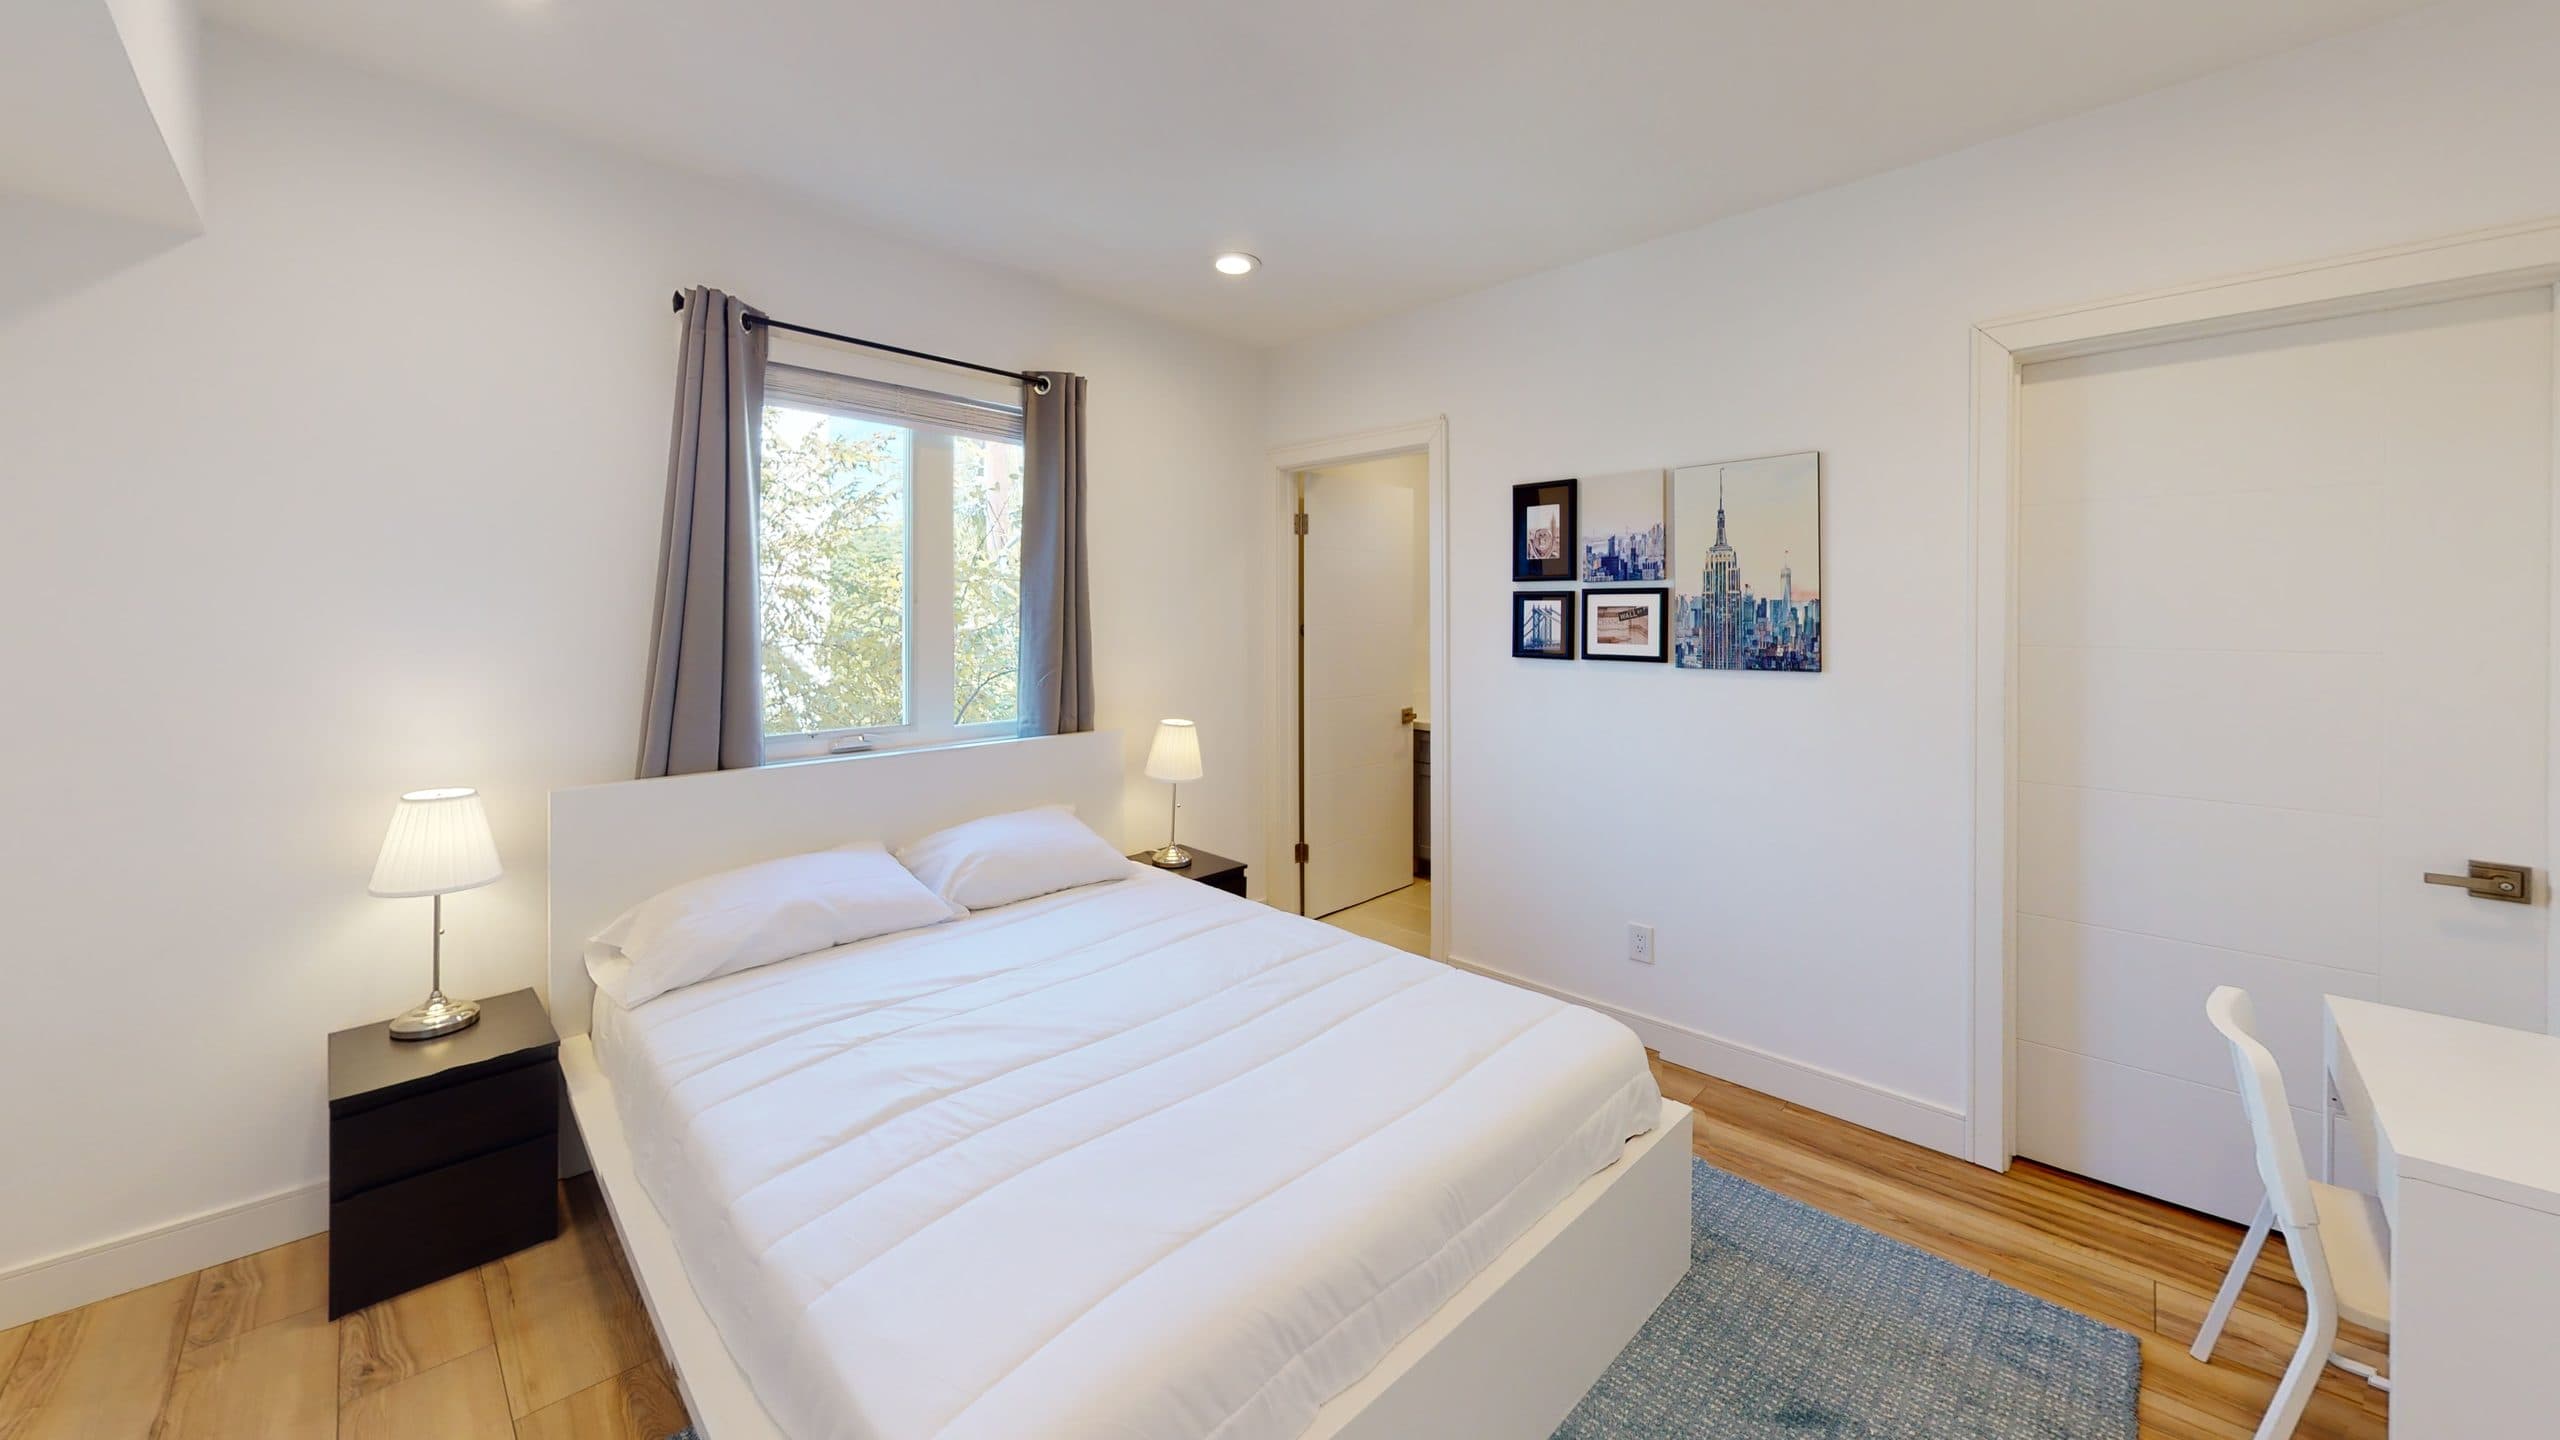 Photo 27 of #2373: Queen Bedroom 3B W/Private Bathroom at June Homes